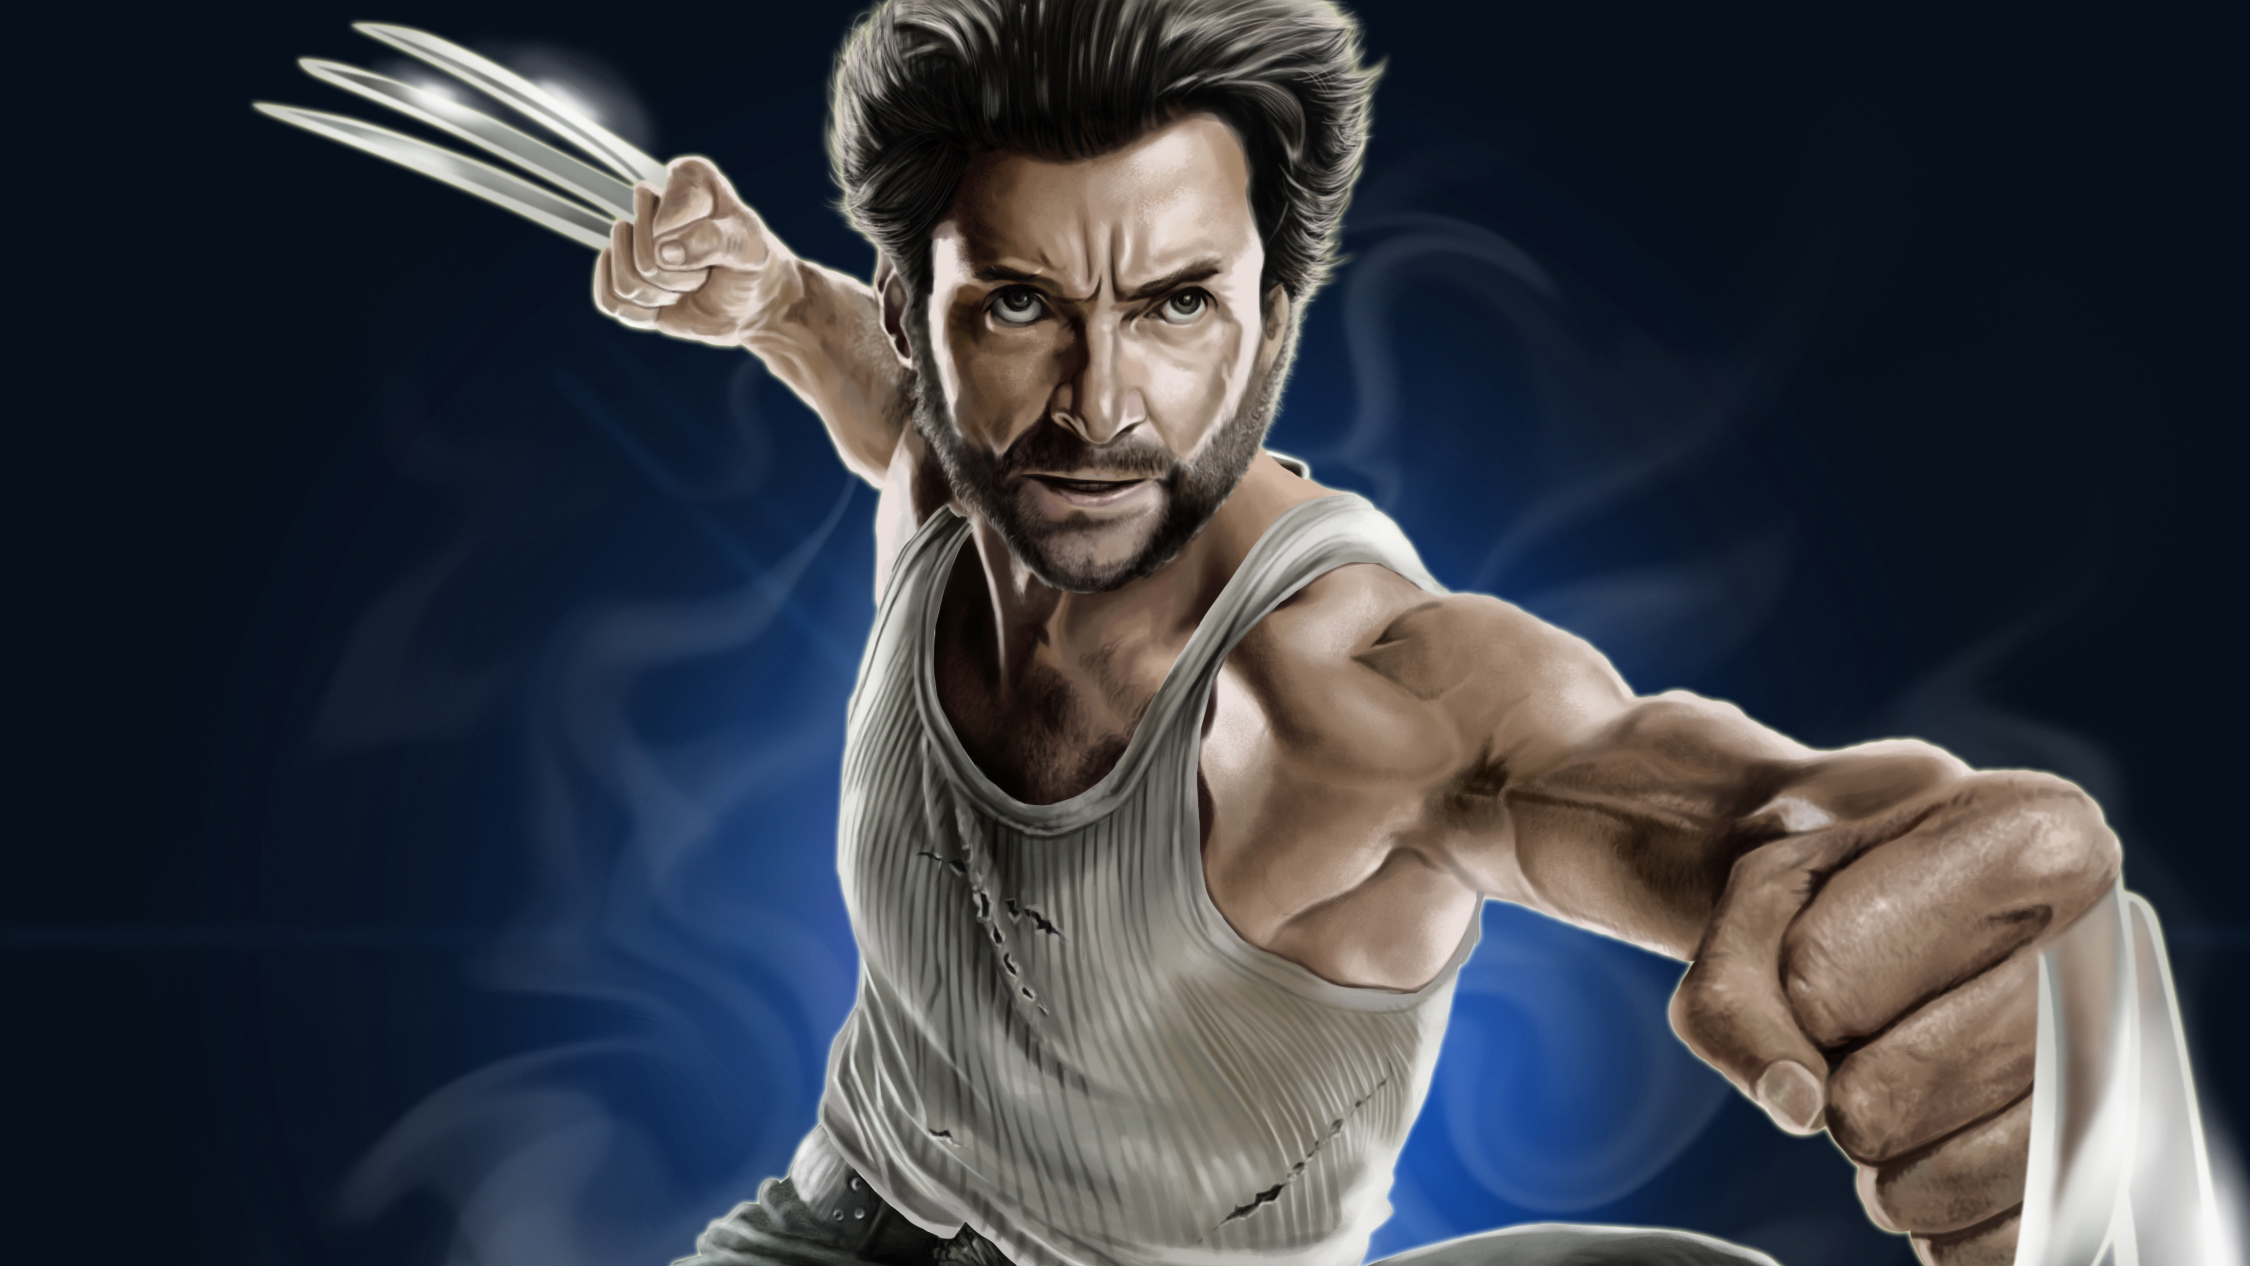 Wallpapers wolverine claws works of art on the desktop